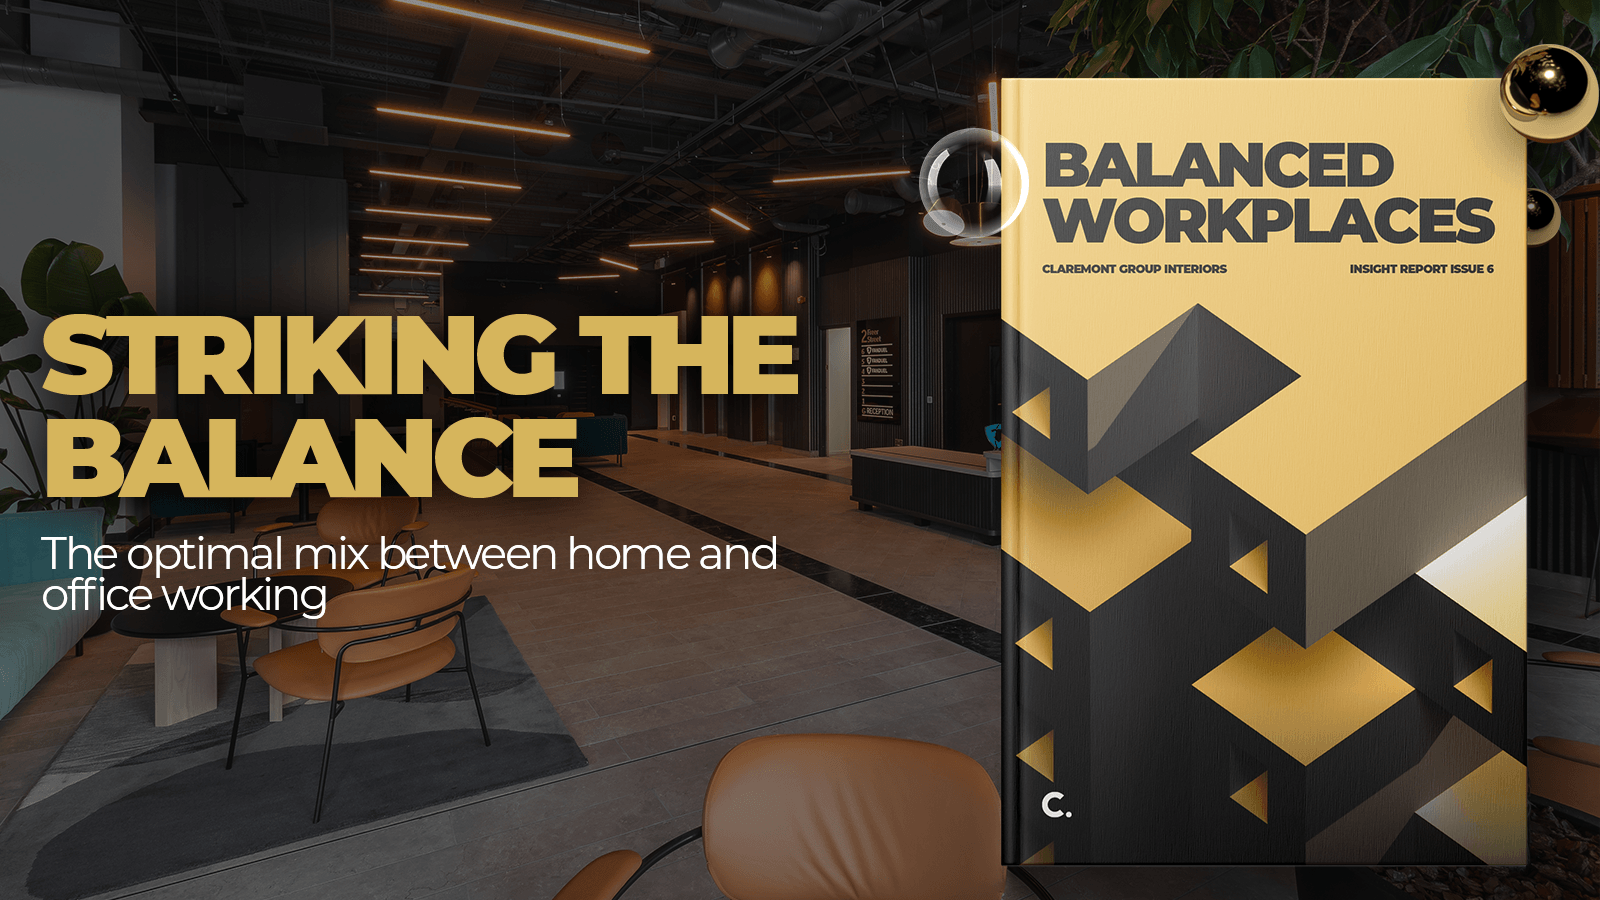 Striking The Balance – The optimal mix between home and office working